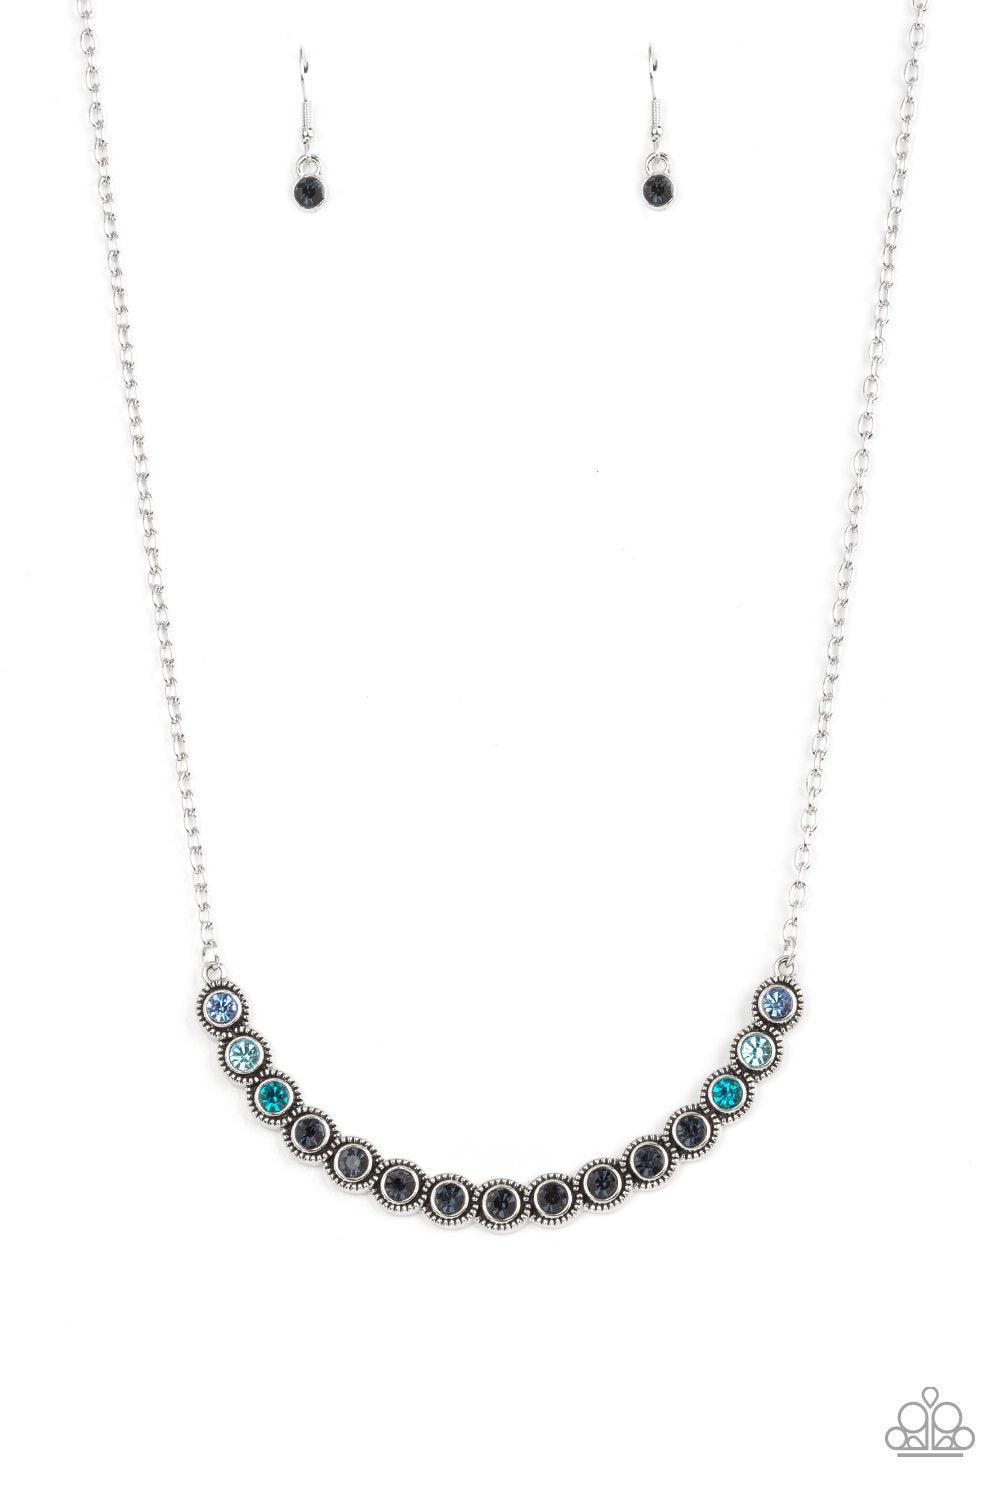 Throwing SHADES Blue Rhinestone Necklace - Paparazzi Accessories- lightbox - CarasShop.com - $5 Jewelry by Cara Jewels